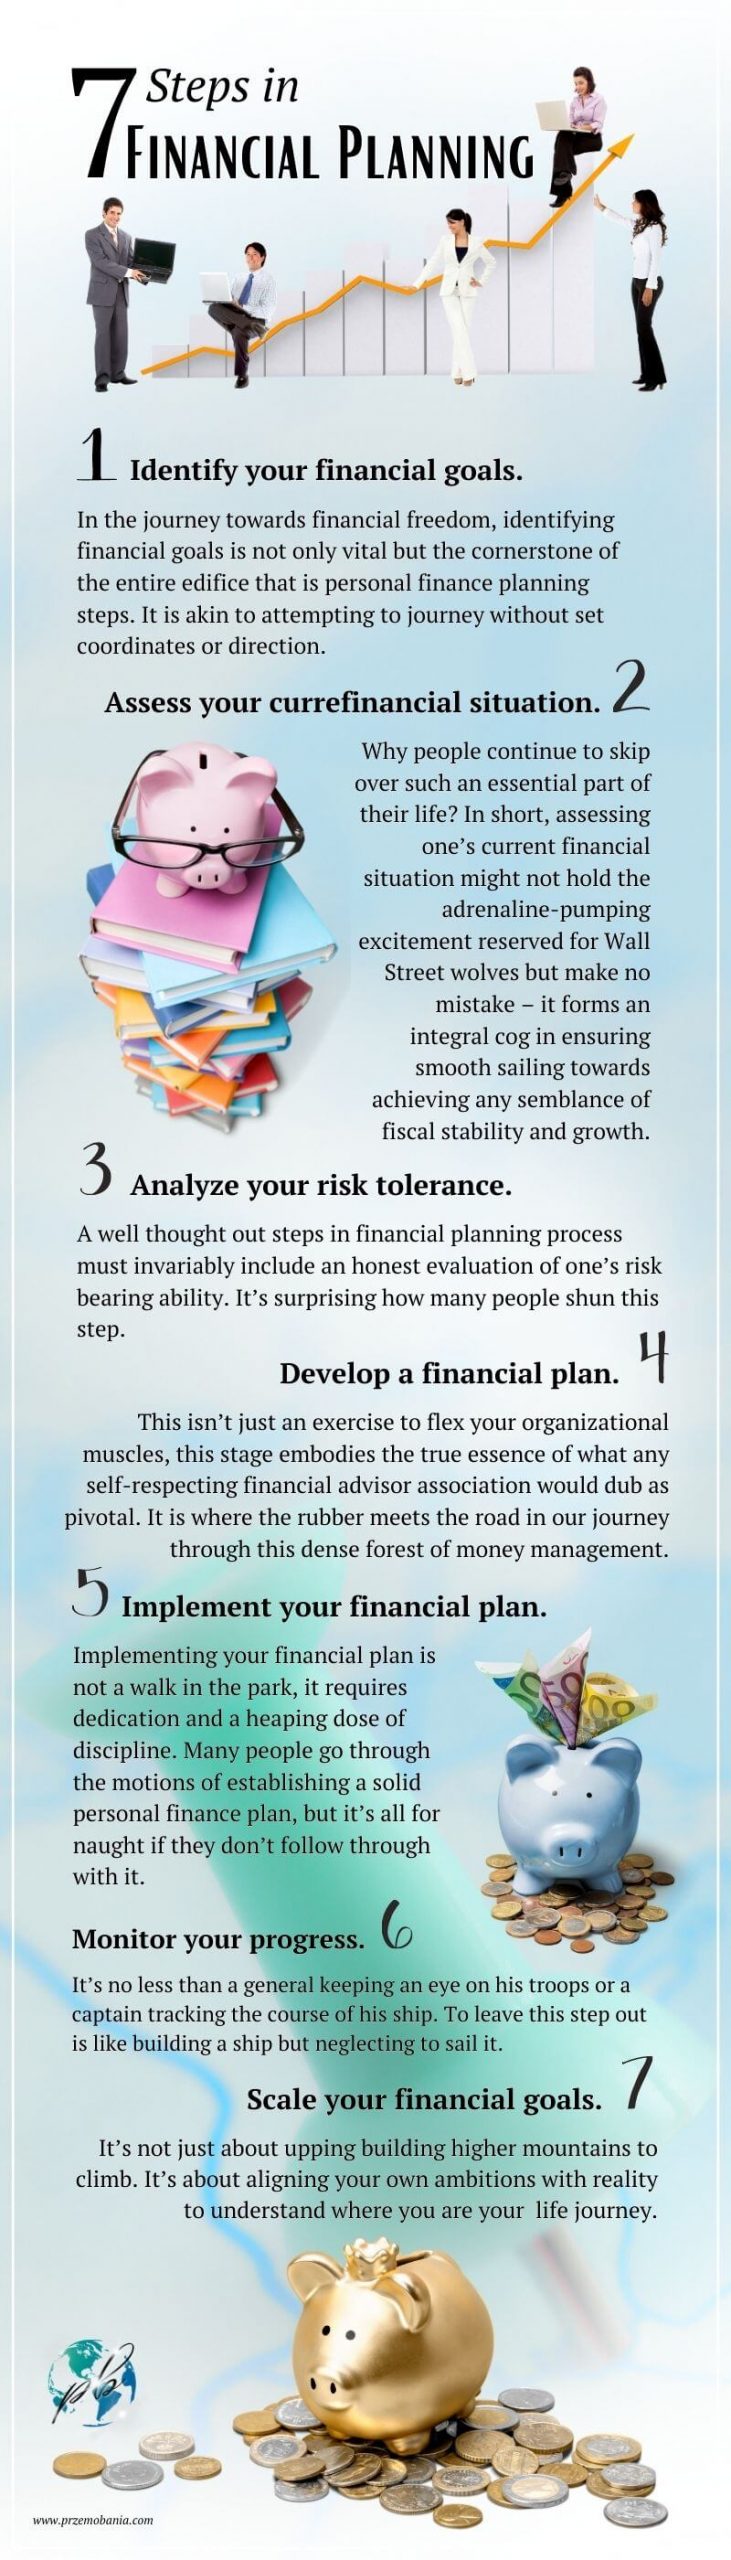 7 financial planning steps infographic